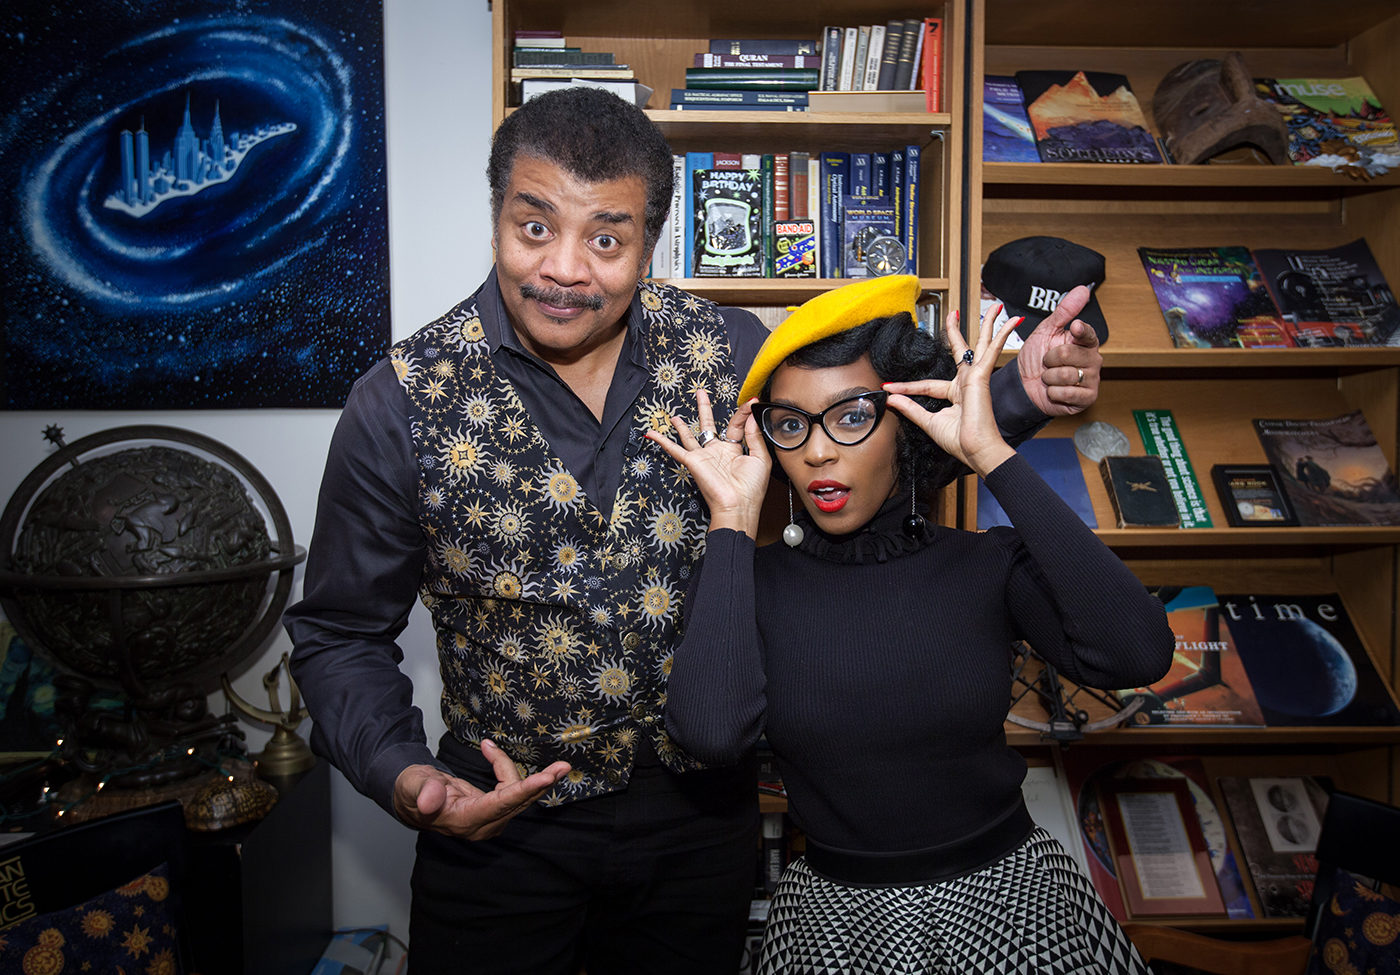 Brandon Royal’s photo of Neil deGrasse Tyson and Janelle Monáe in Neil’s office at the Hayden Planetarium.